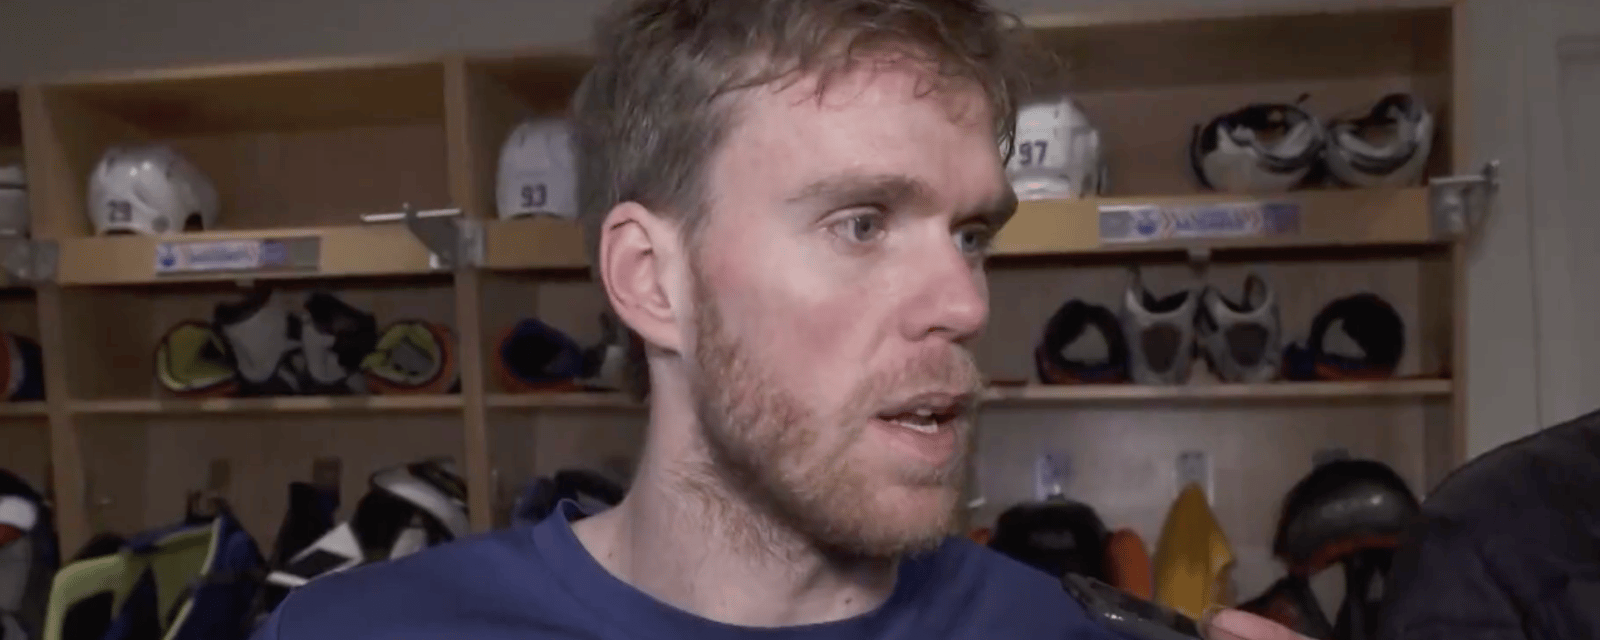 Connor McDavid sounds off on playing in Toronto 